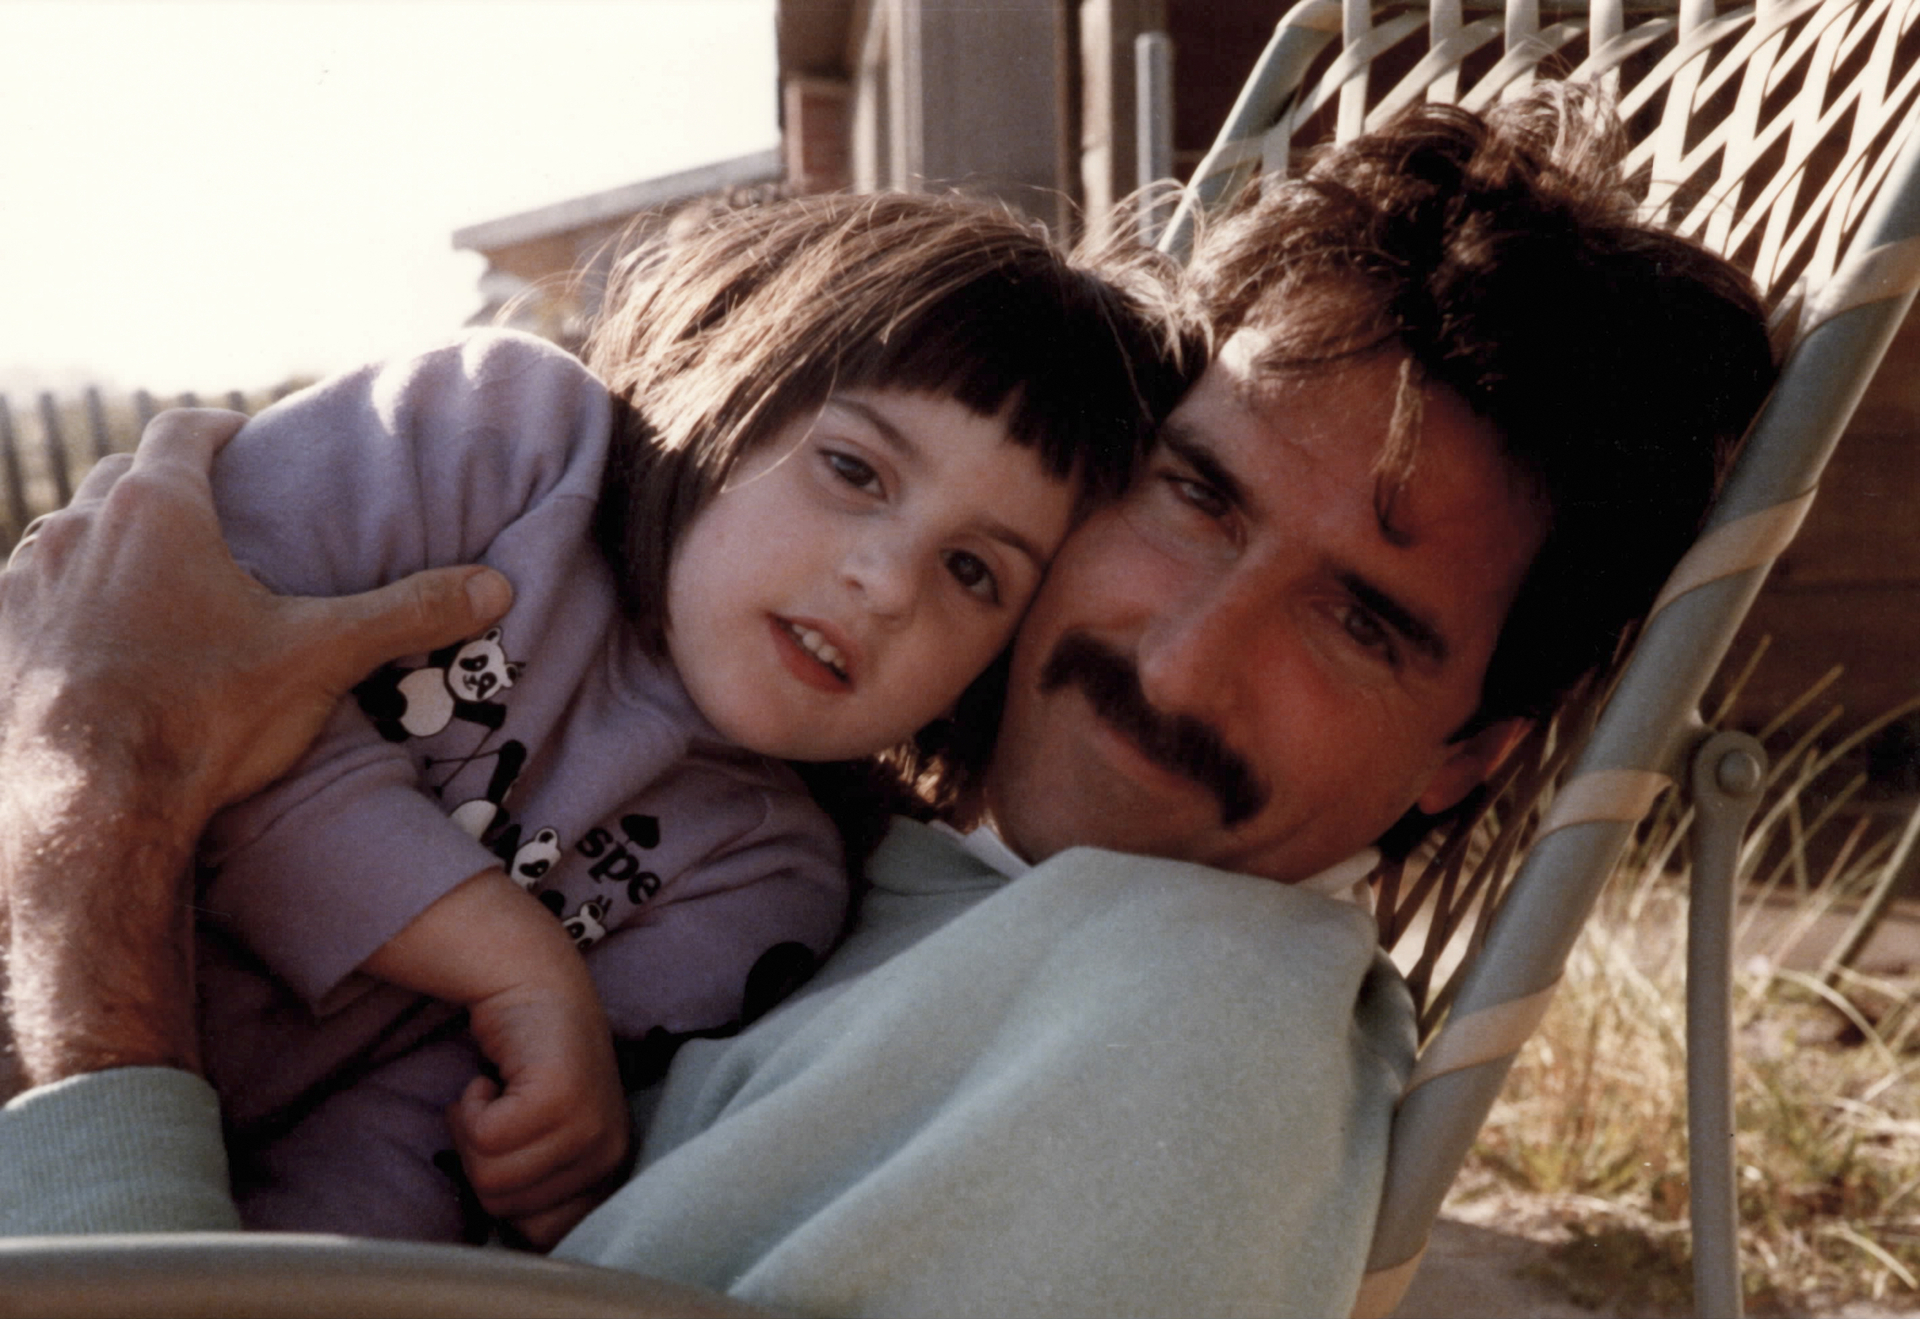 Ry Russo-Young as a child with her donor Tom Steel (Courtesy of HBO)